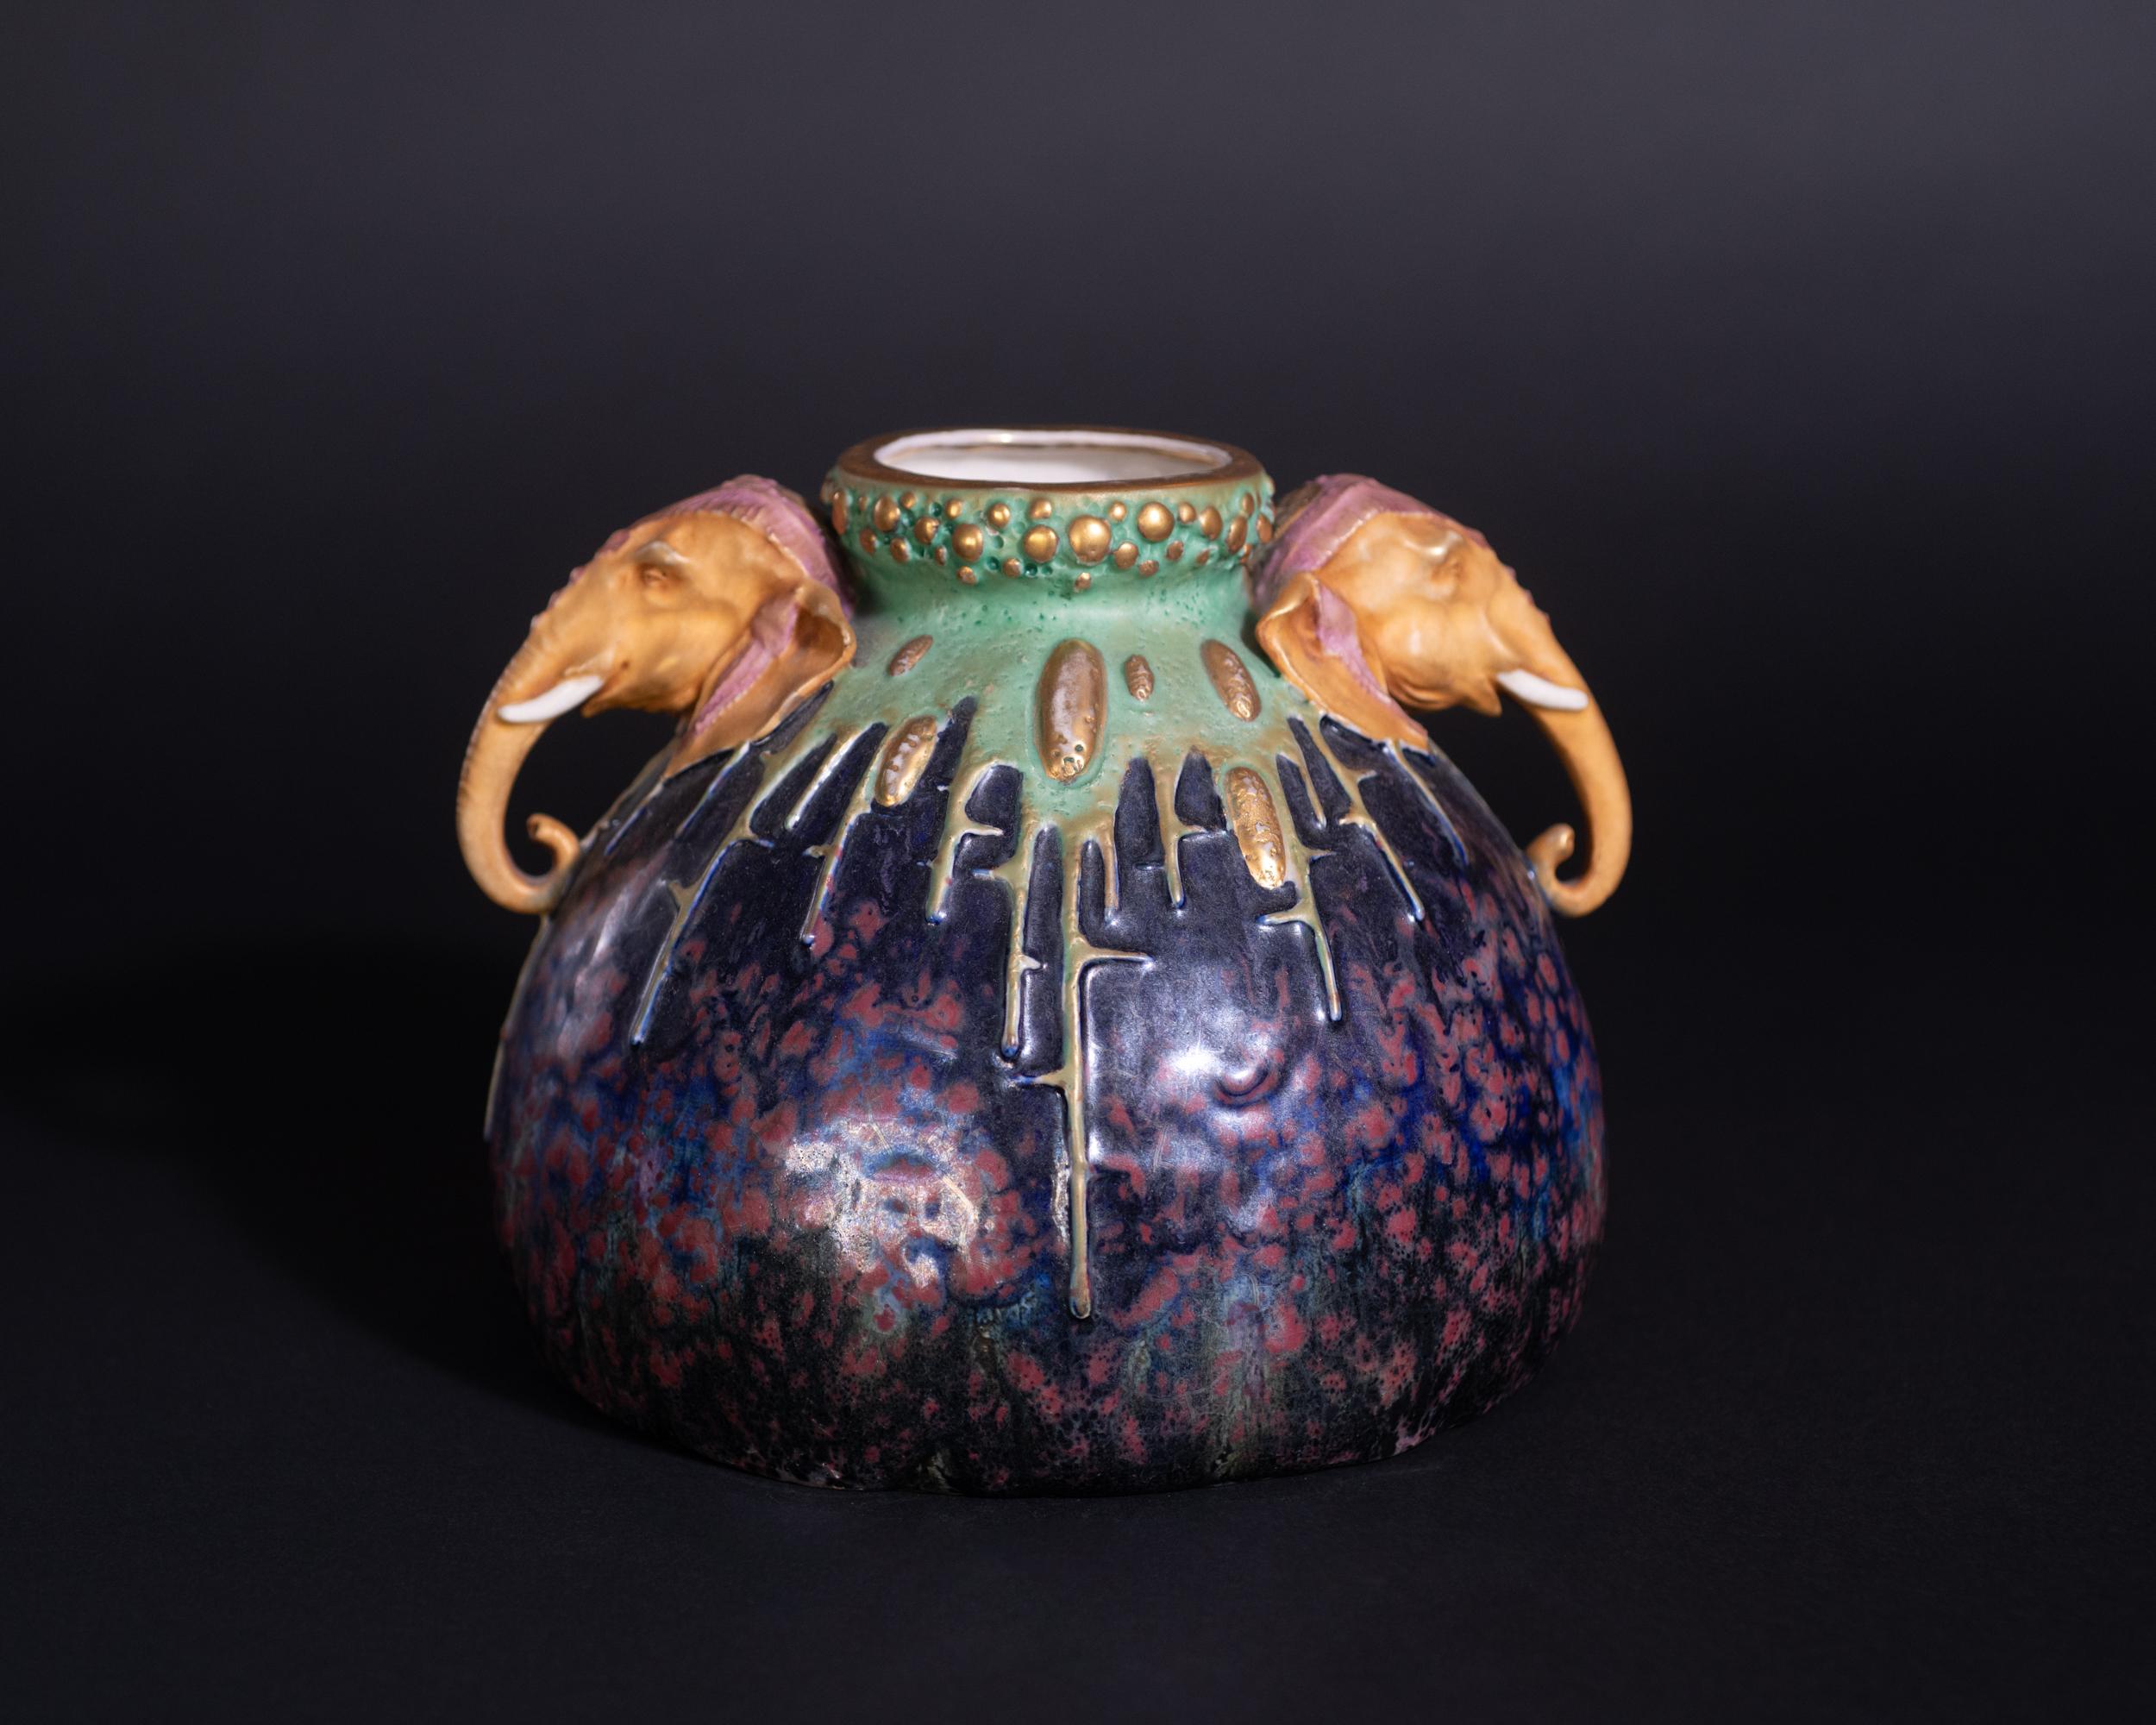 Riessner, Stellmacher and Kessel (RSt&K), consistently marked pieces with the tradename “Amphora” by the late 1890s and became known by that name. The Amphora pottery factory was located in Turn-Teplitz, Austria. By the mid-19th century, the area